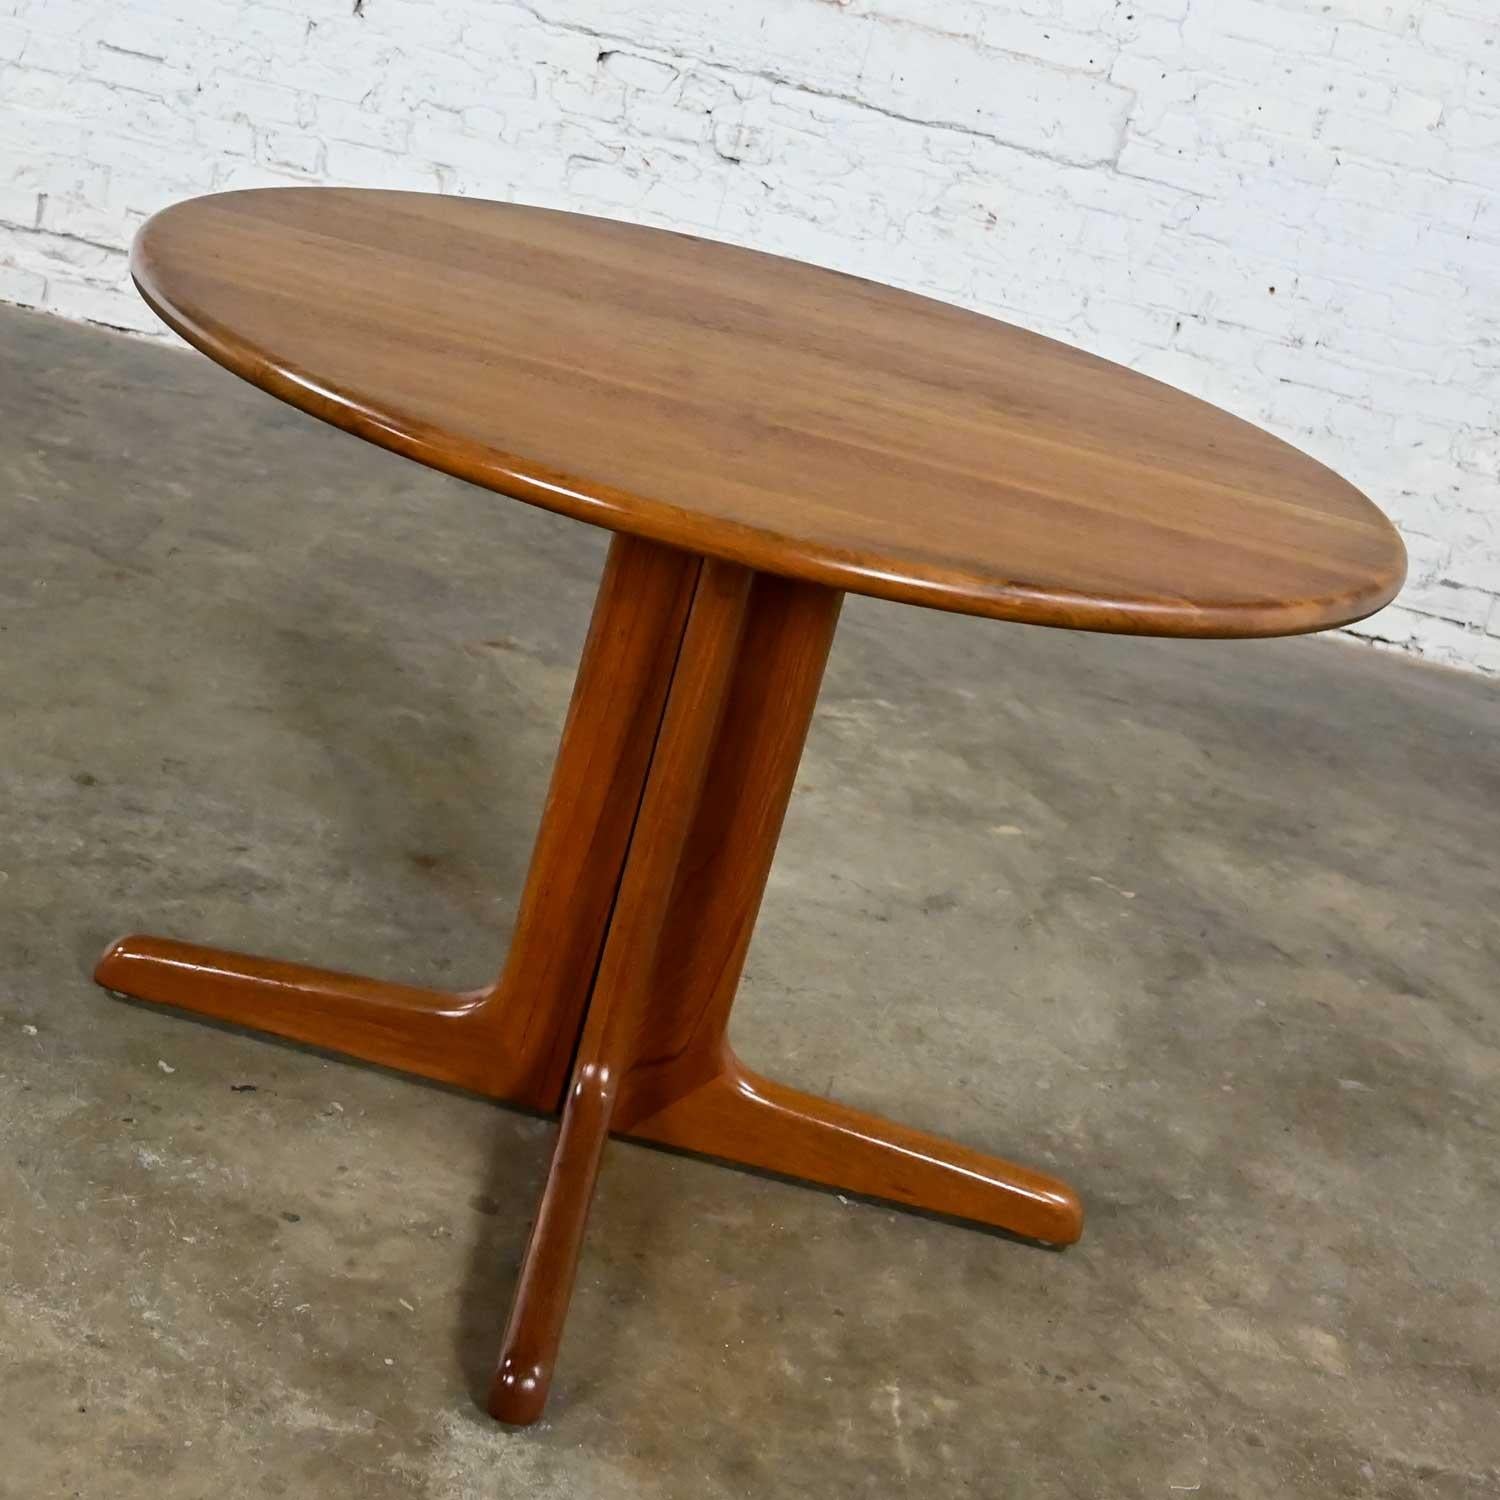 Fantastic vintage Scandinavian Modern teak round top pedestal base dining table by KD Furniture manufactured by Sun Furniture for import. Beautiful condition, keeping in mind that this is vintage and not new so will have signs of use and wear. There